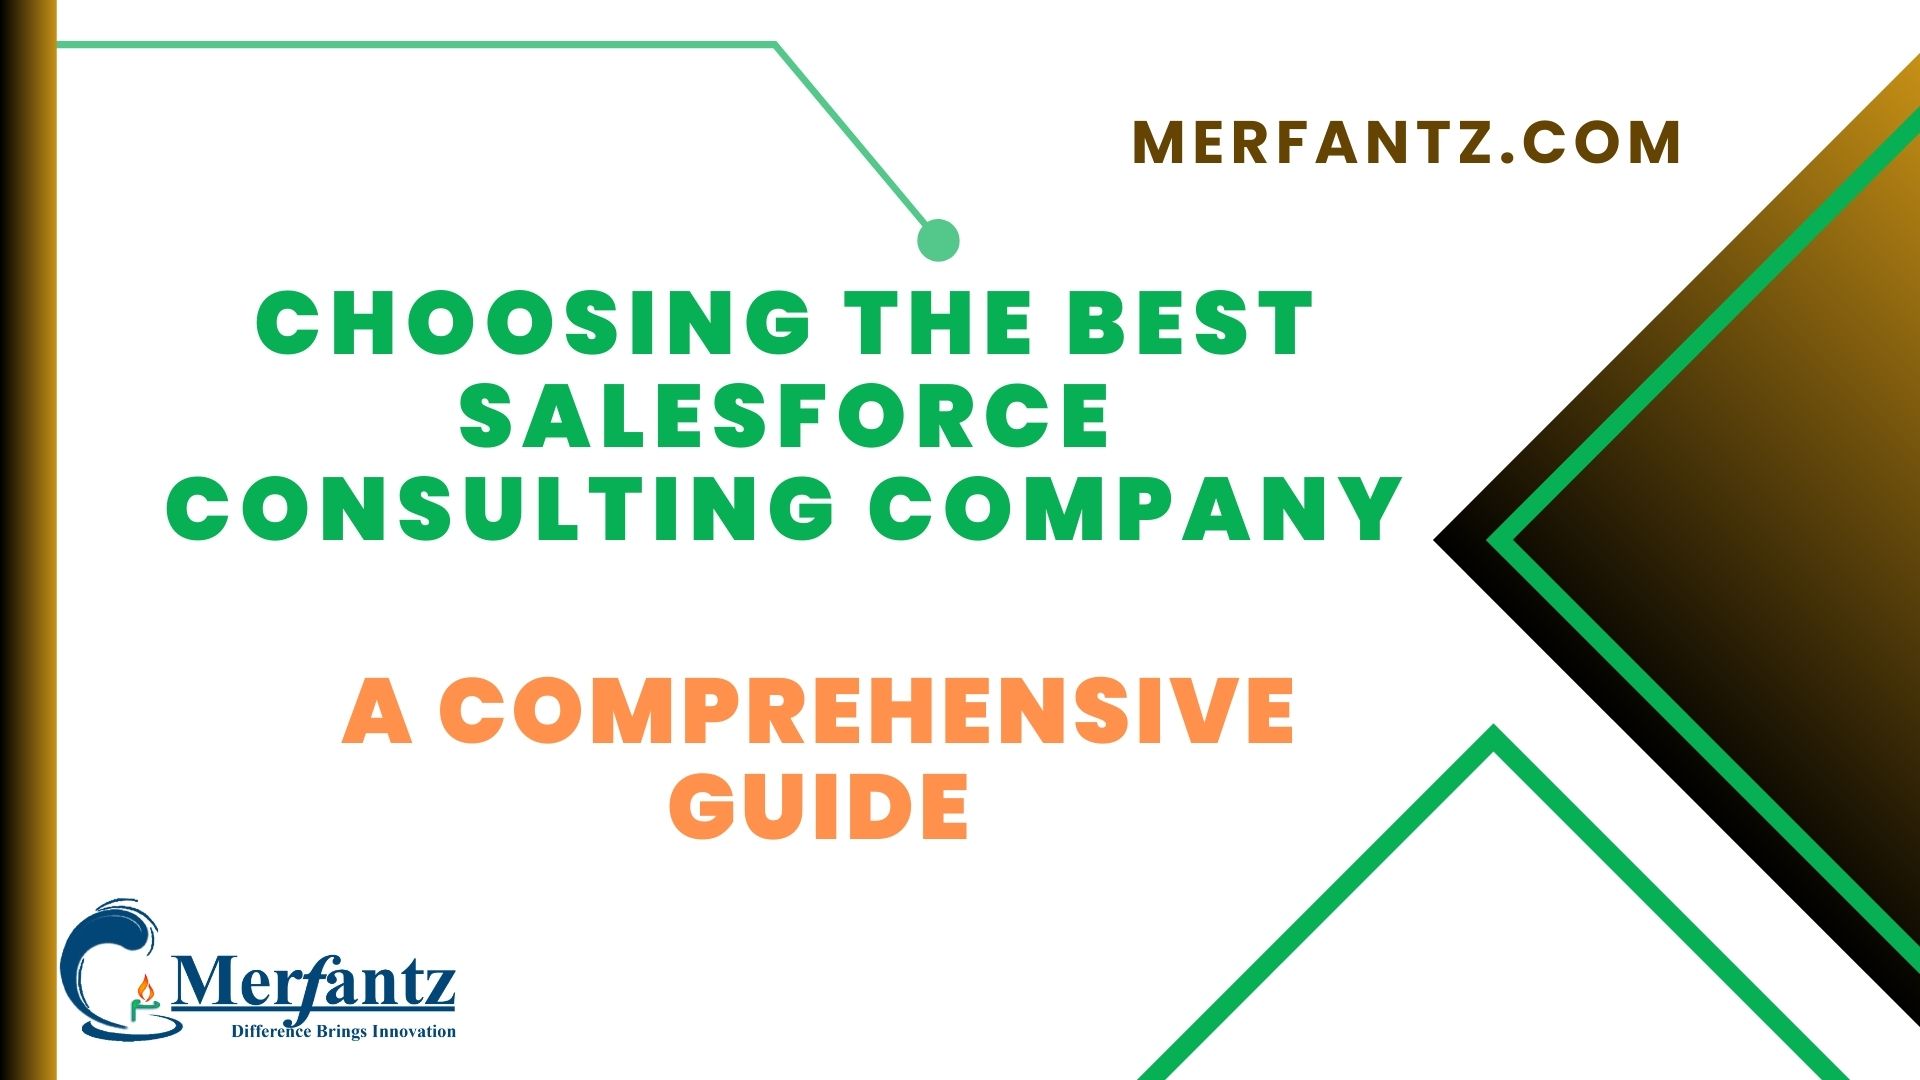 Choosing the Best Salesforce Consulting Company A Comprehensive Guide -Merfantz Technologies